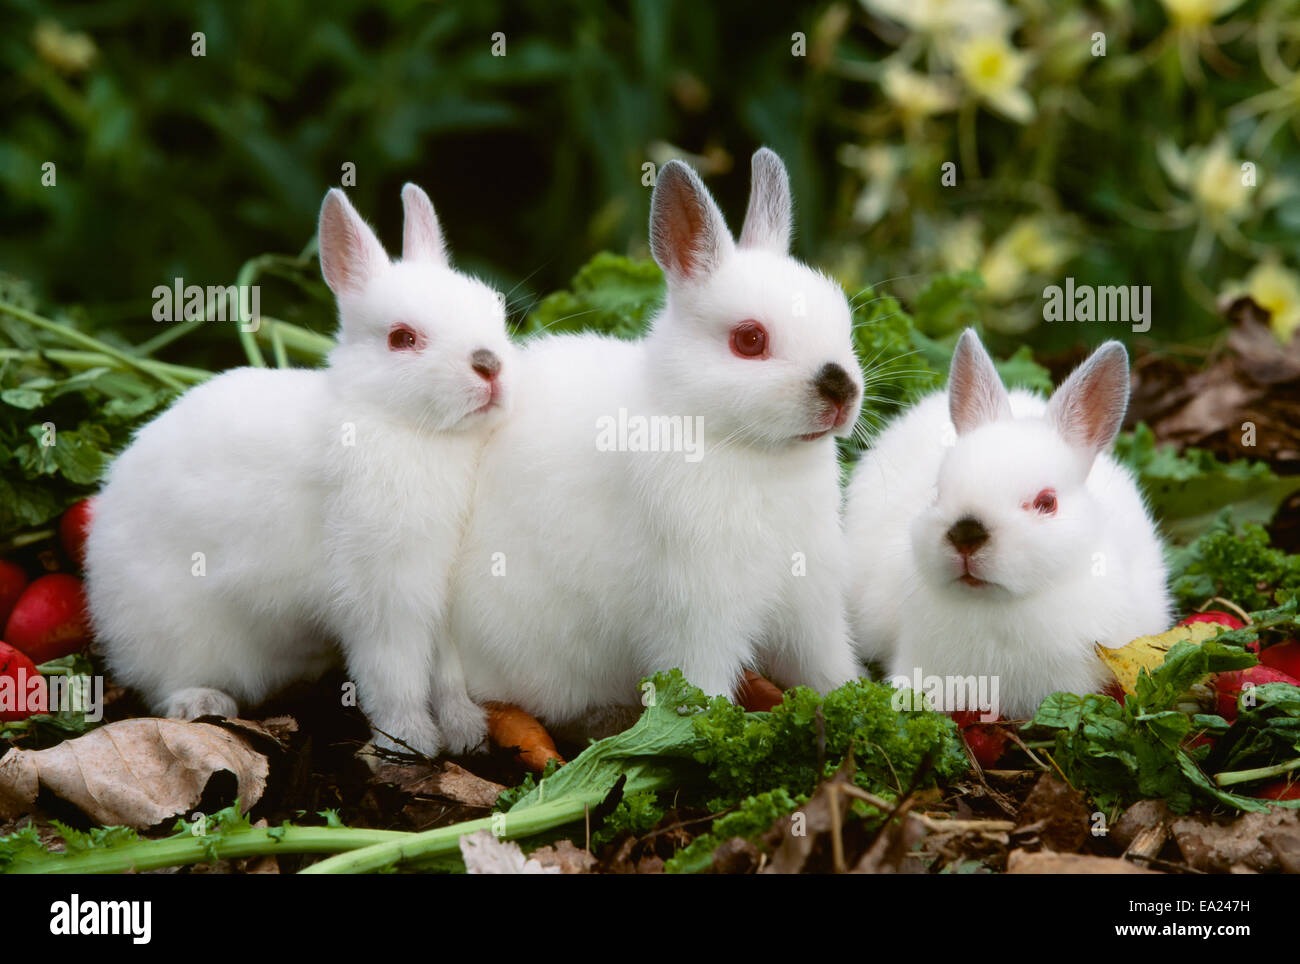 Livestock - Domestic Rabbits, Netherland Dwarf babies in a garden with vegetables / Illinois, USA. Stock Photo